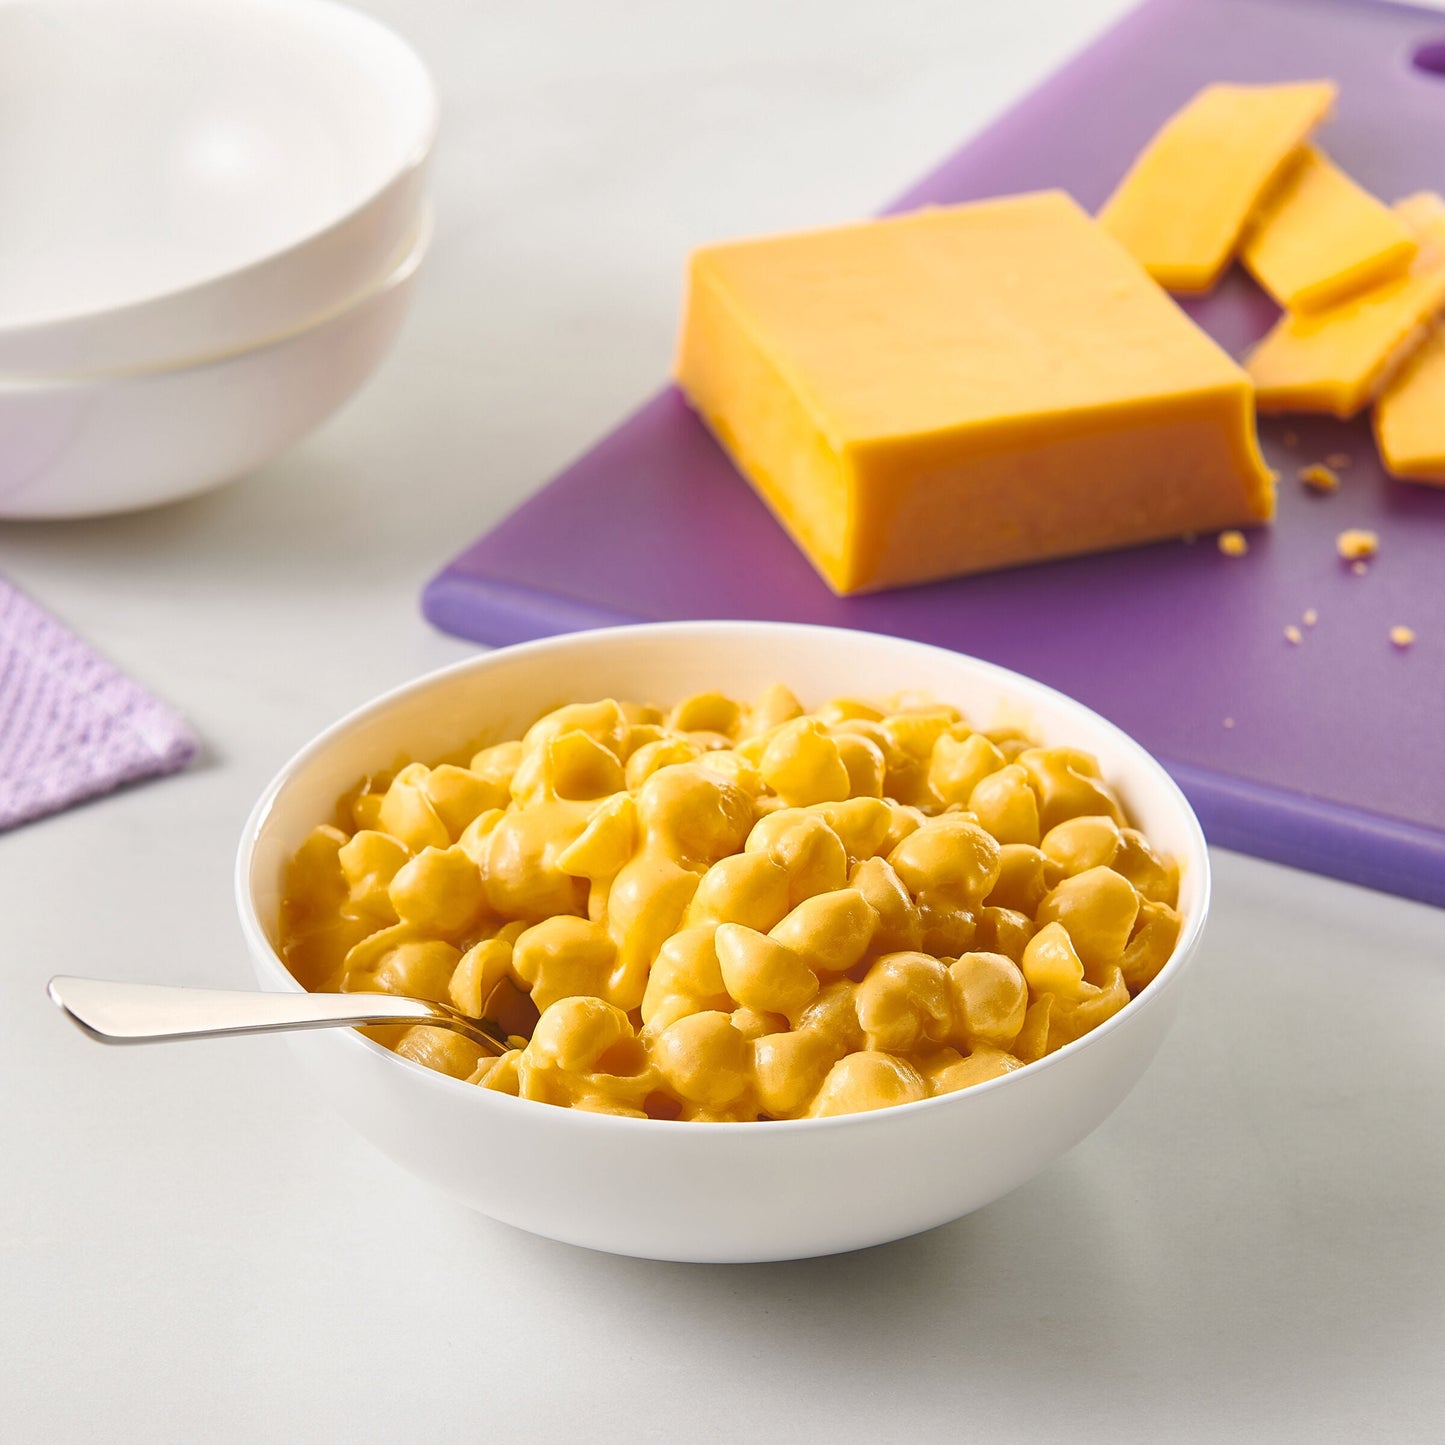 Super! Mac, Macaroni and Cheese, Shells and Real Aged Cheddar, 6 Oz